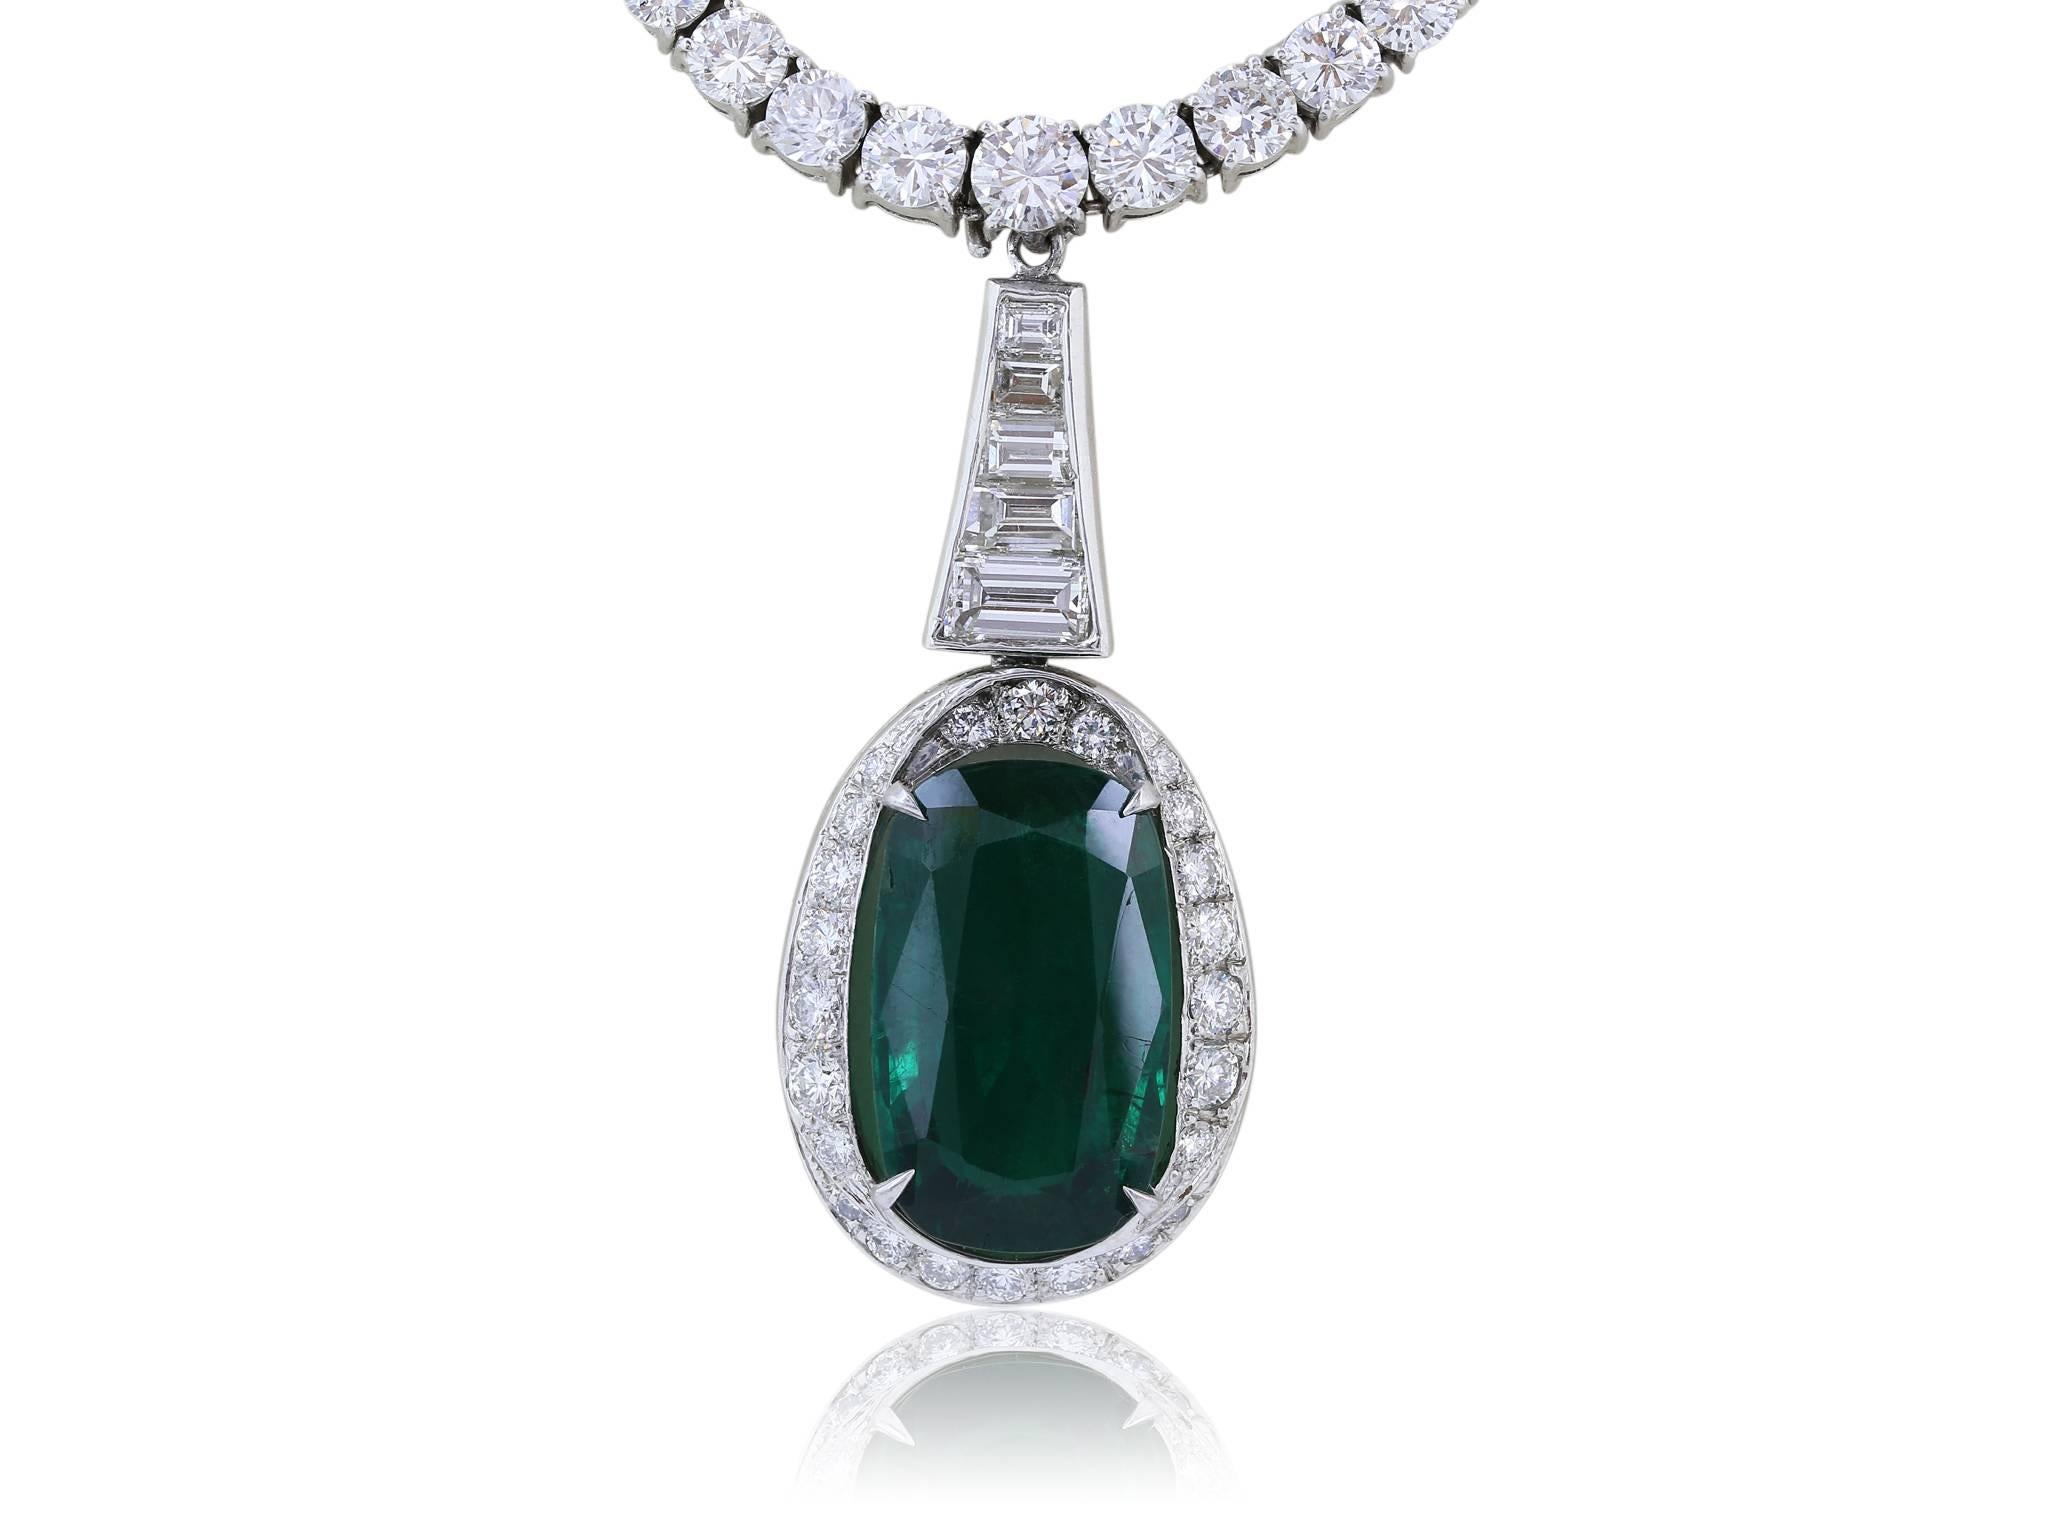 Platinum graduated Riviera diamond necklace, consisting of approximately 12 carats total weight of prong set full cut diamonds, 133 round diamonds and 1 marquis cut diamond on the clasp, featuring a detachable 8.09 carat cushion cut Emerald drop